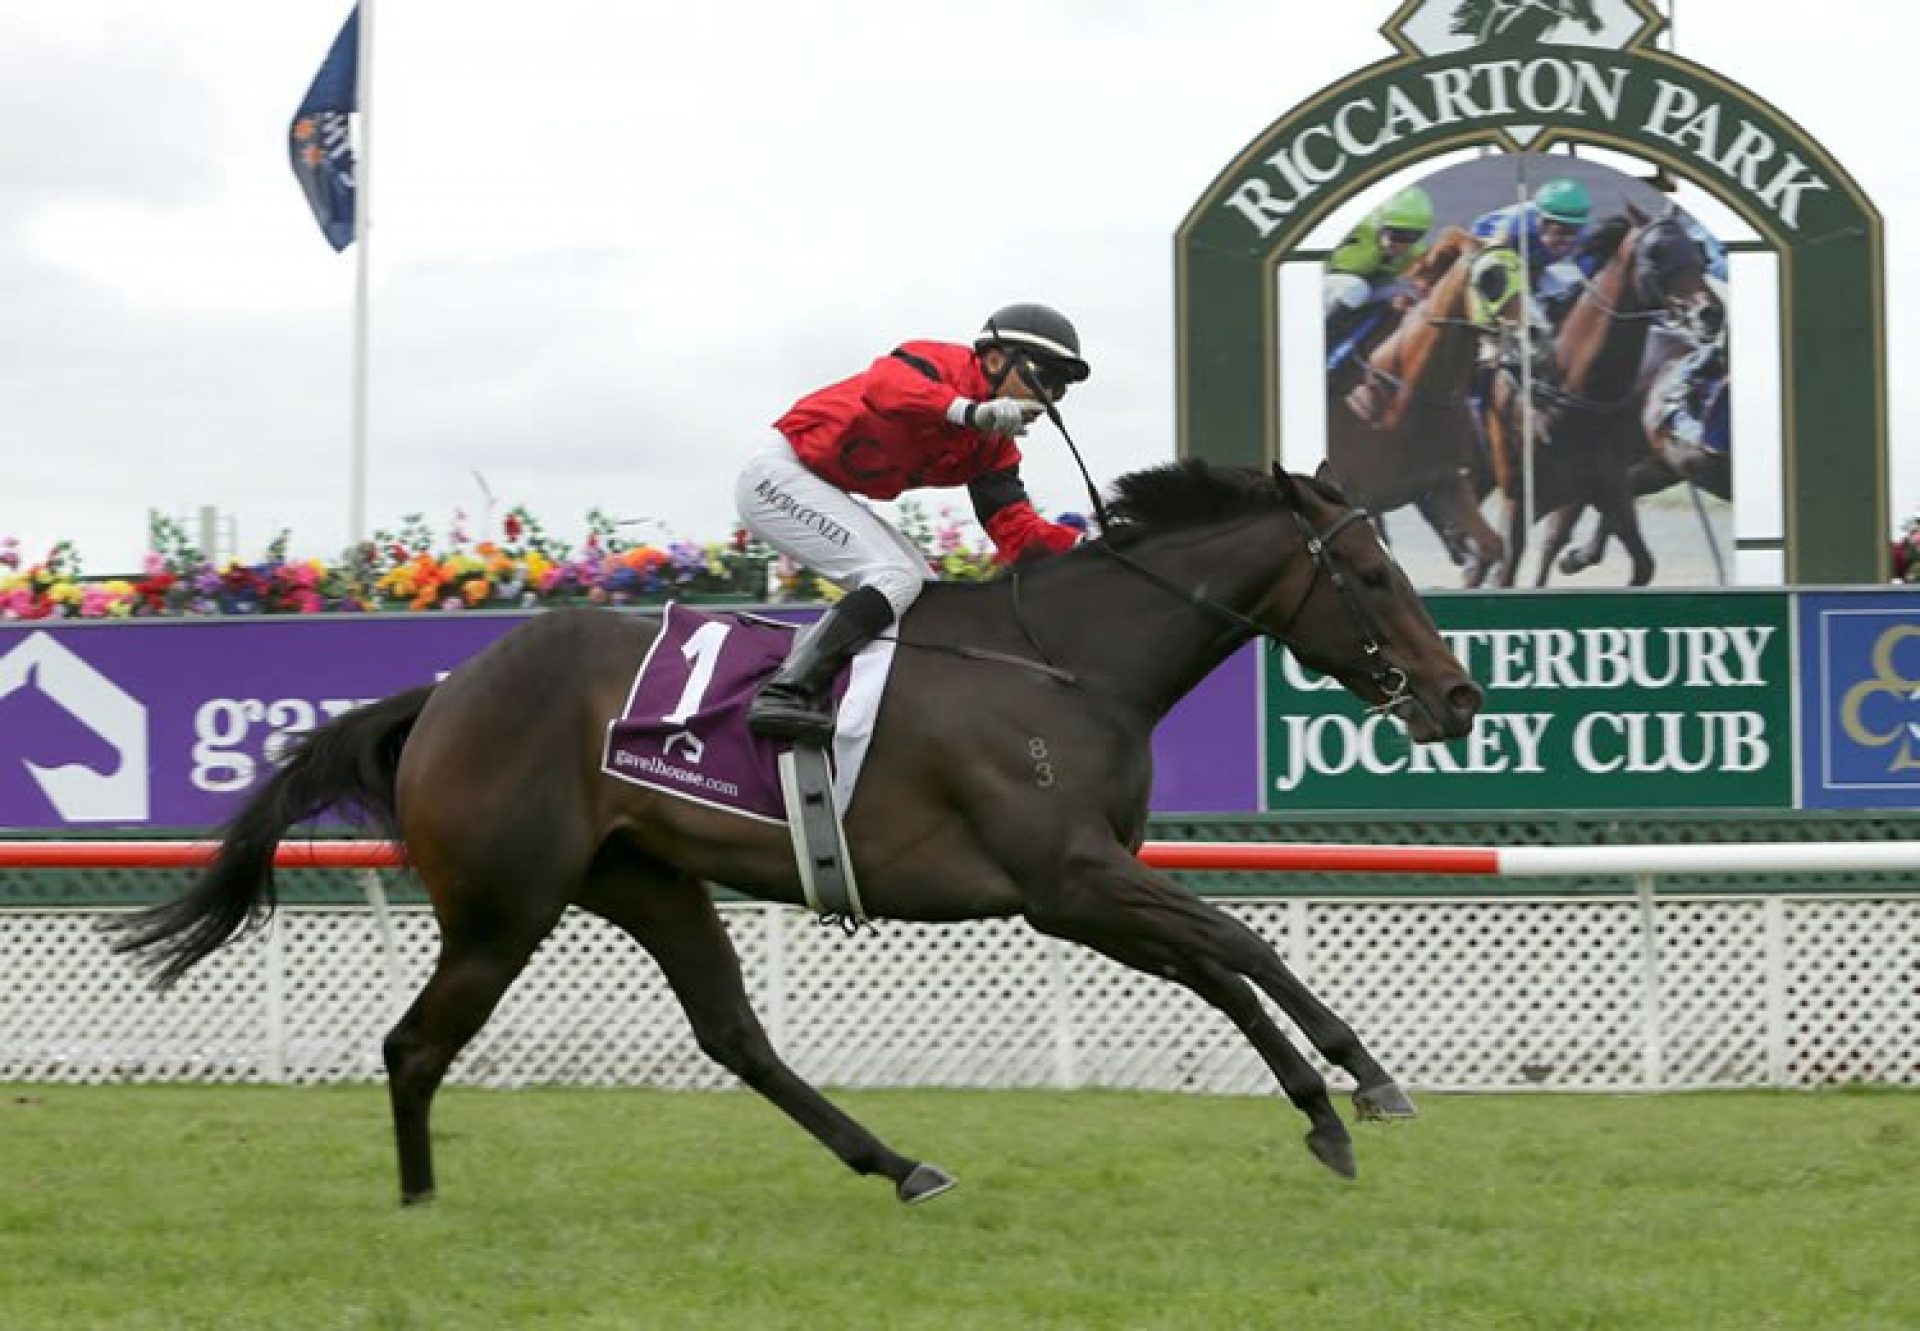 La Diosa (So You Think) winning the NZ Guineas